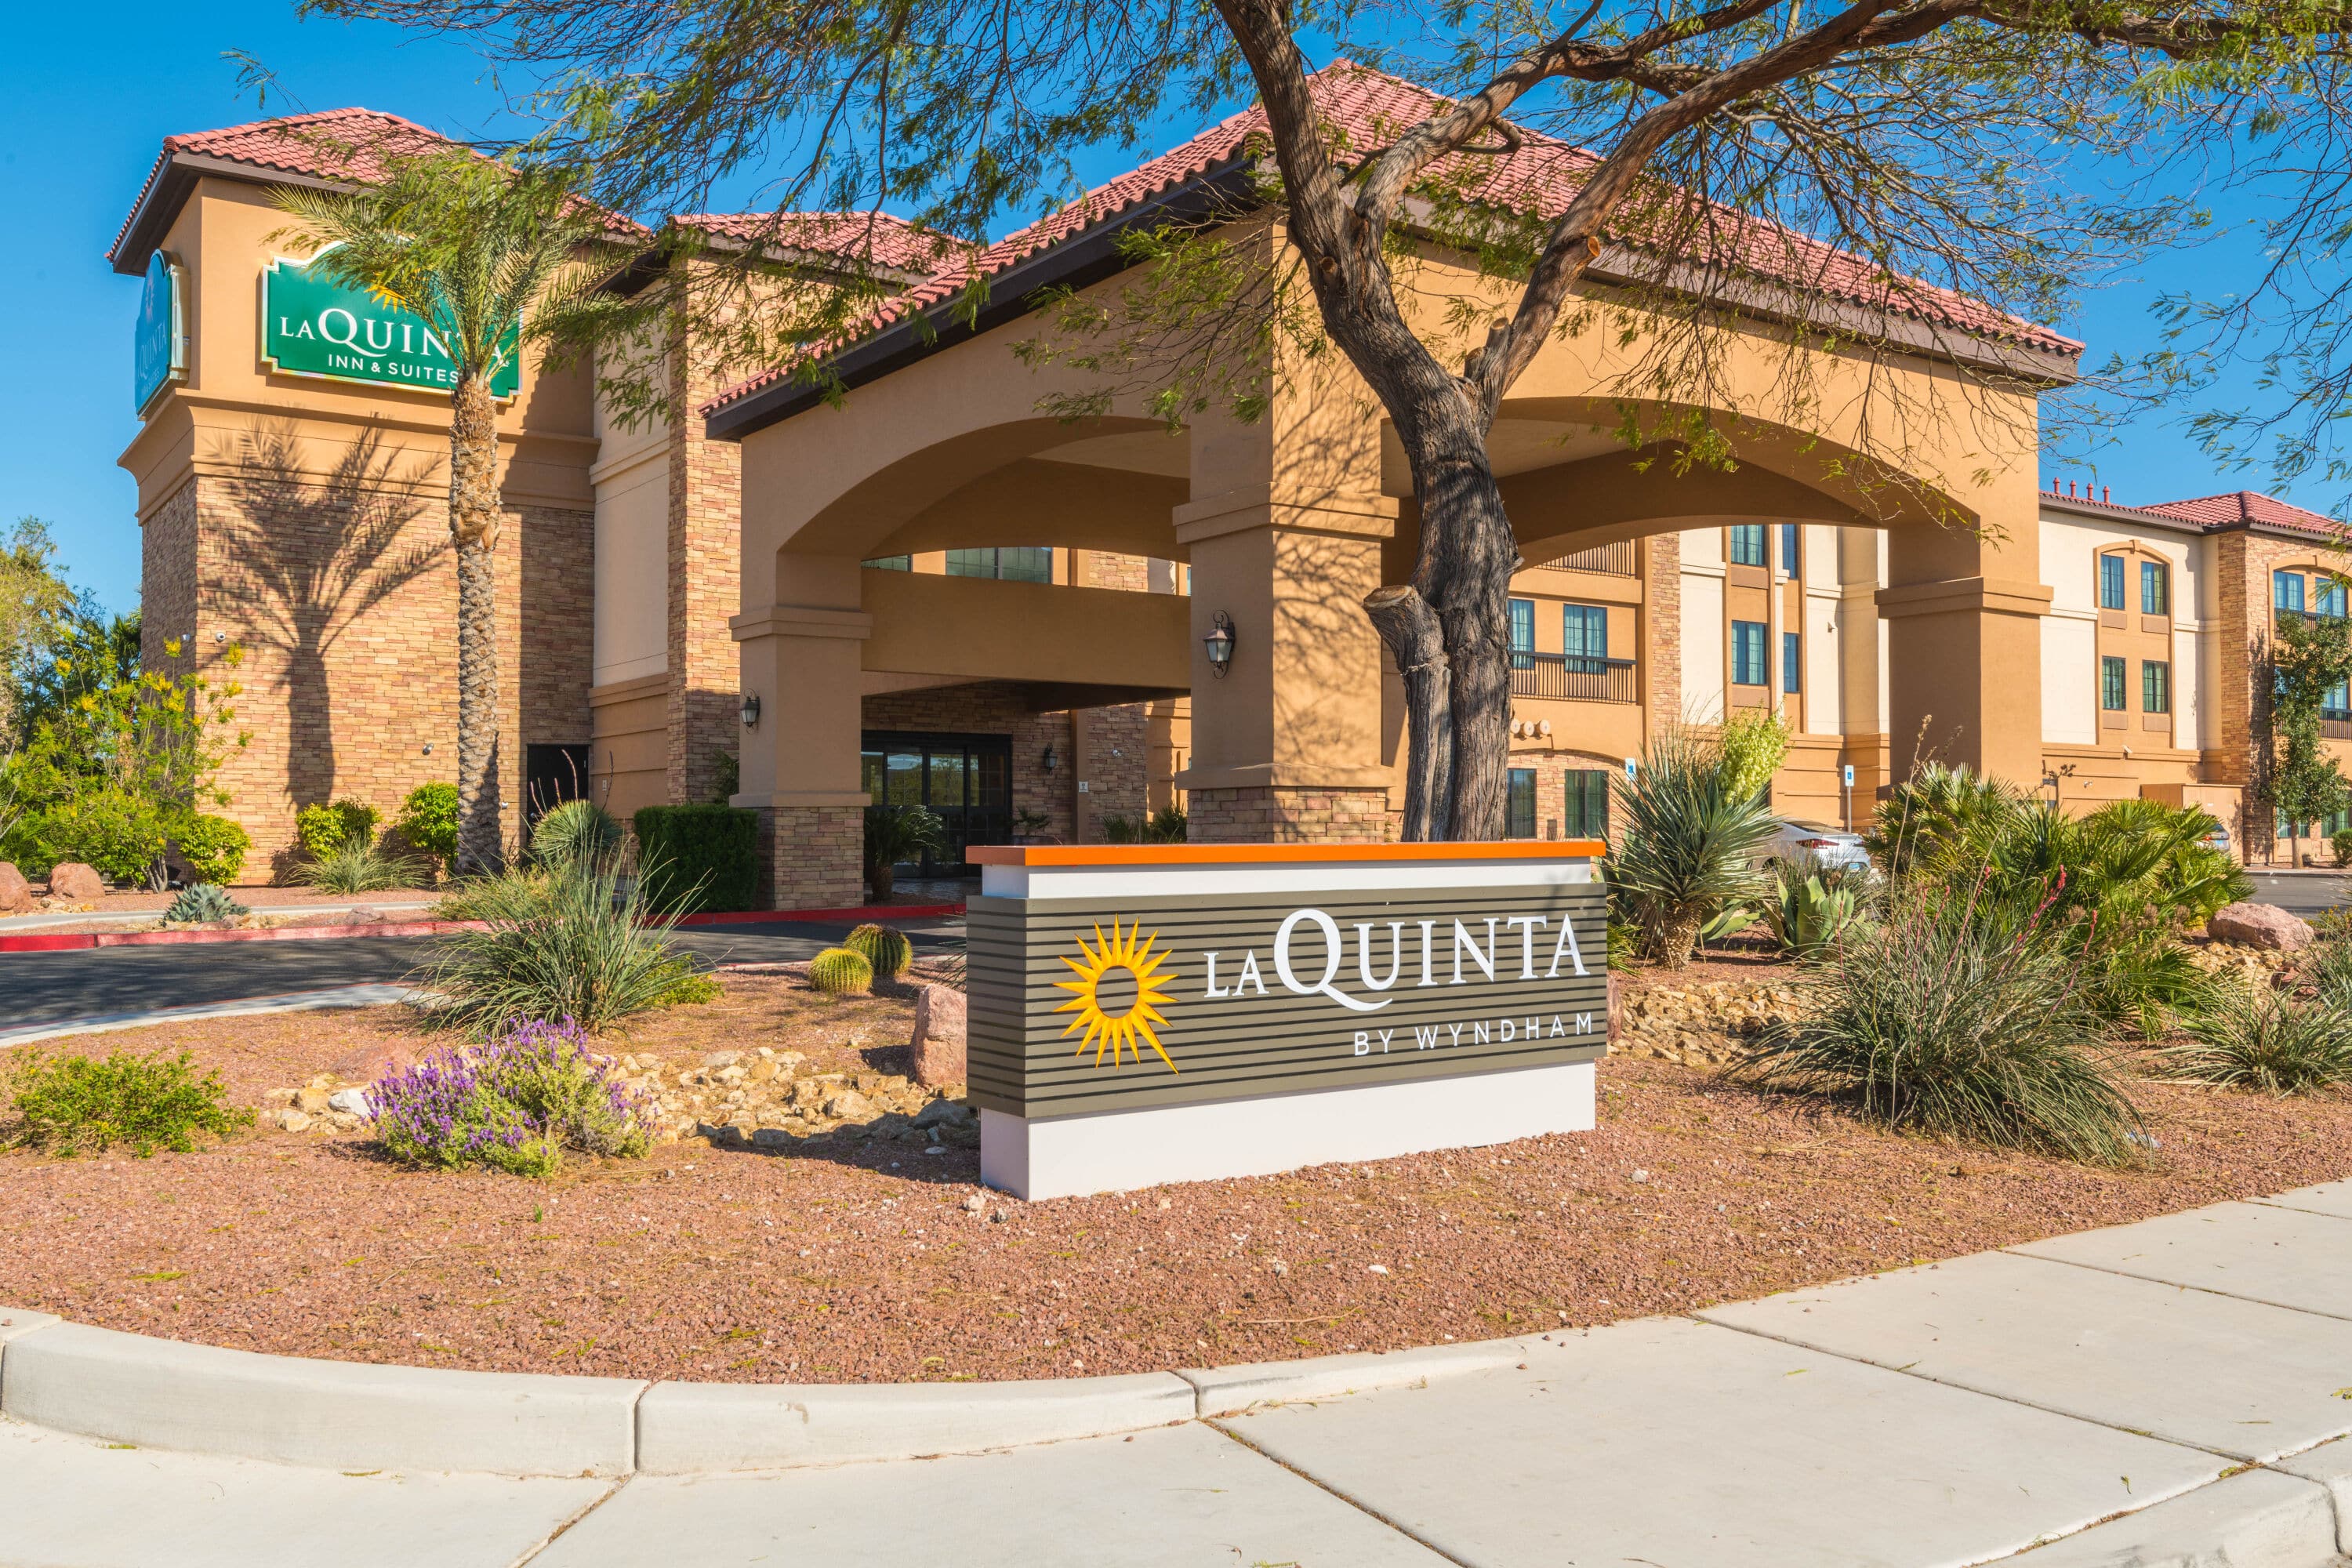 La Quinta Pet Policy: Everything You Need to Know Before Staying The